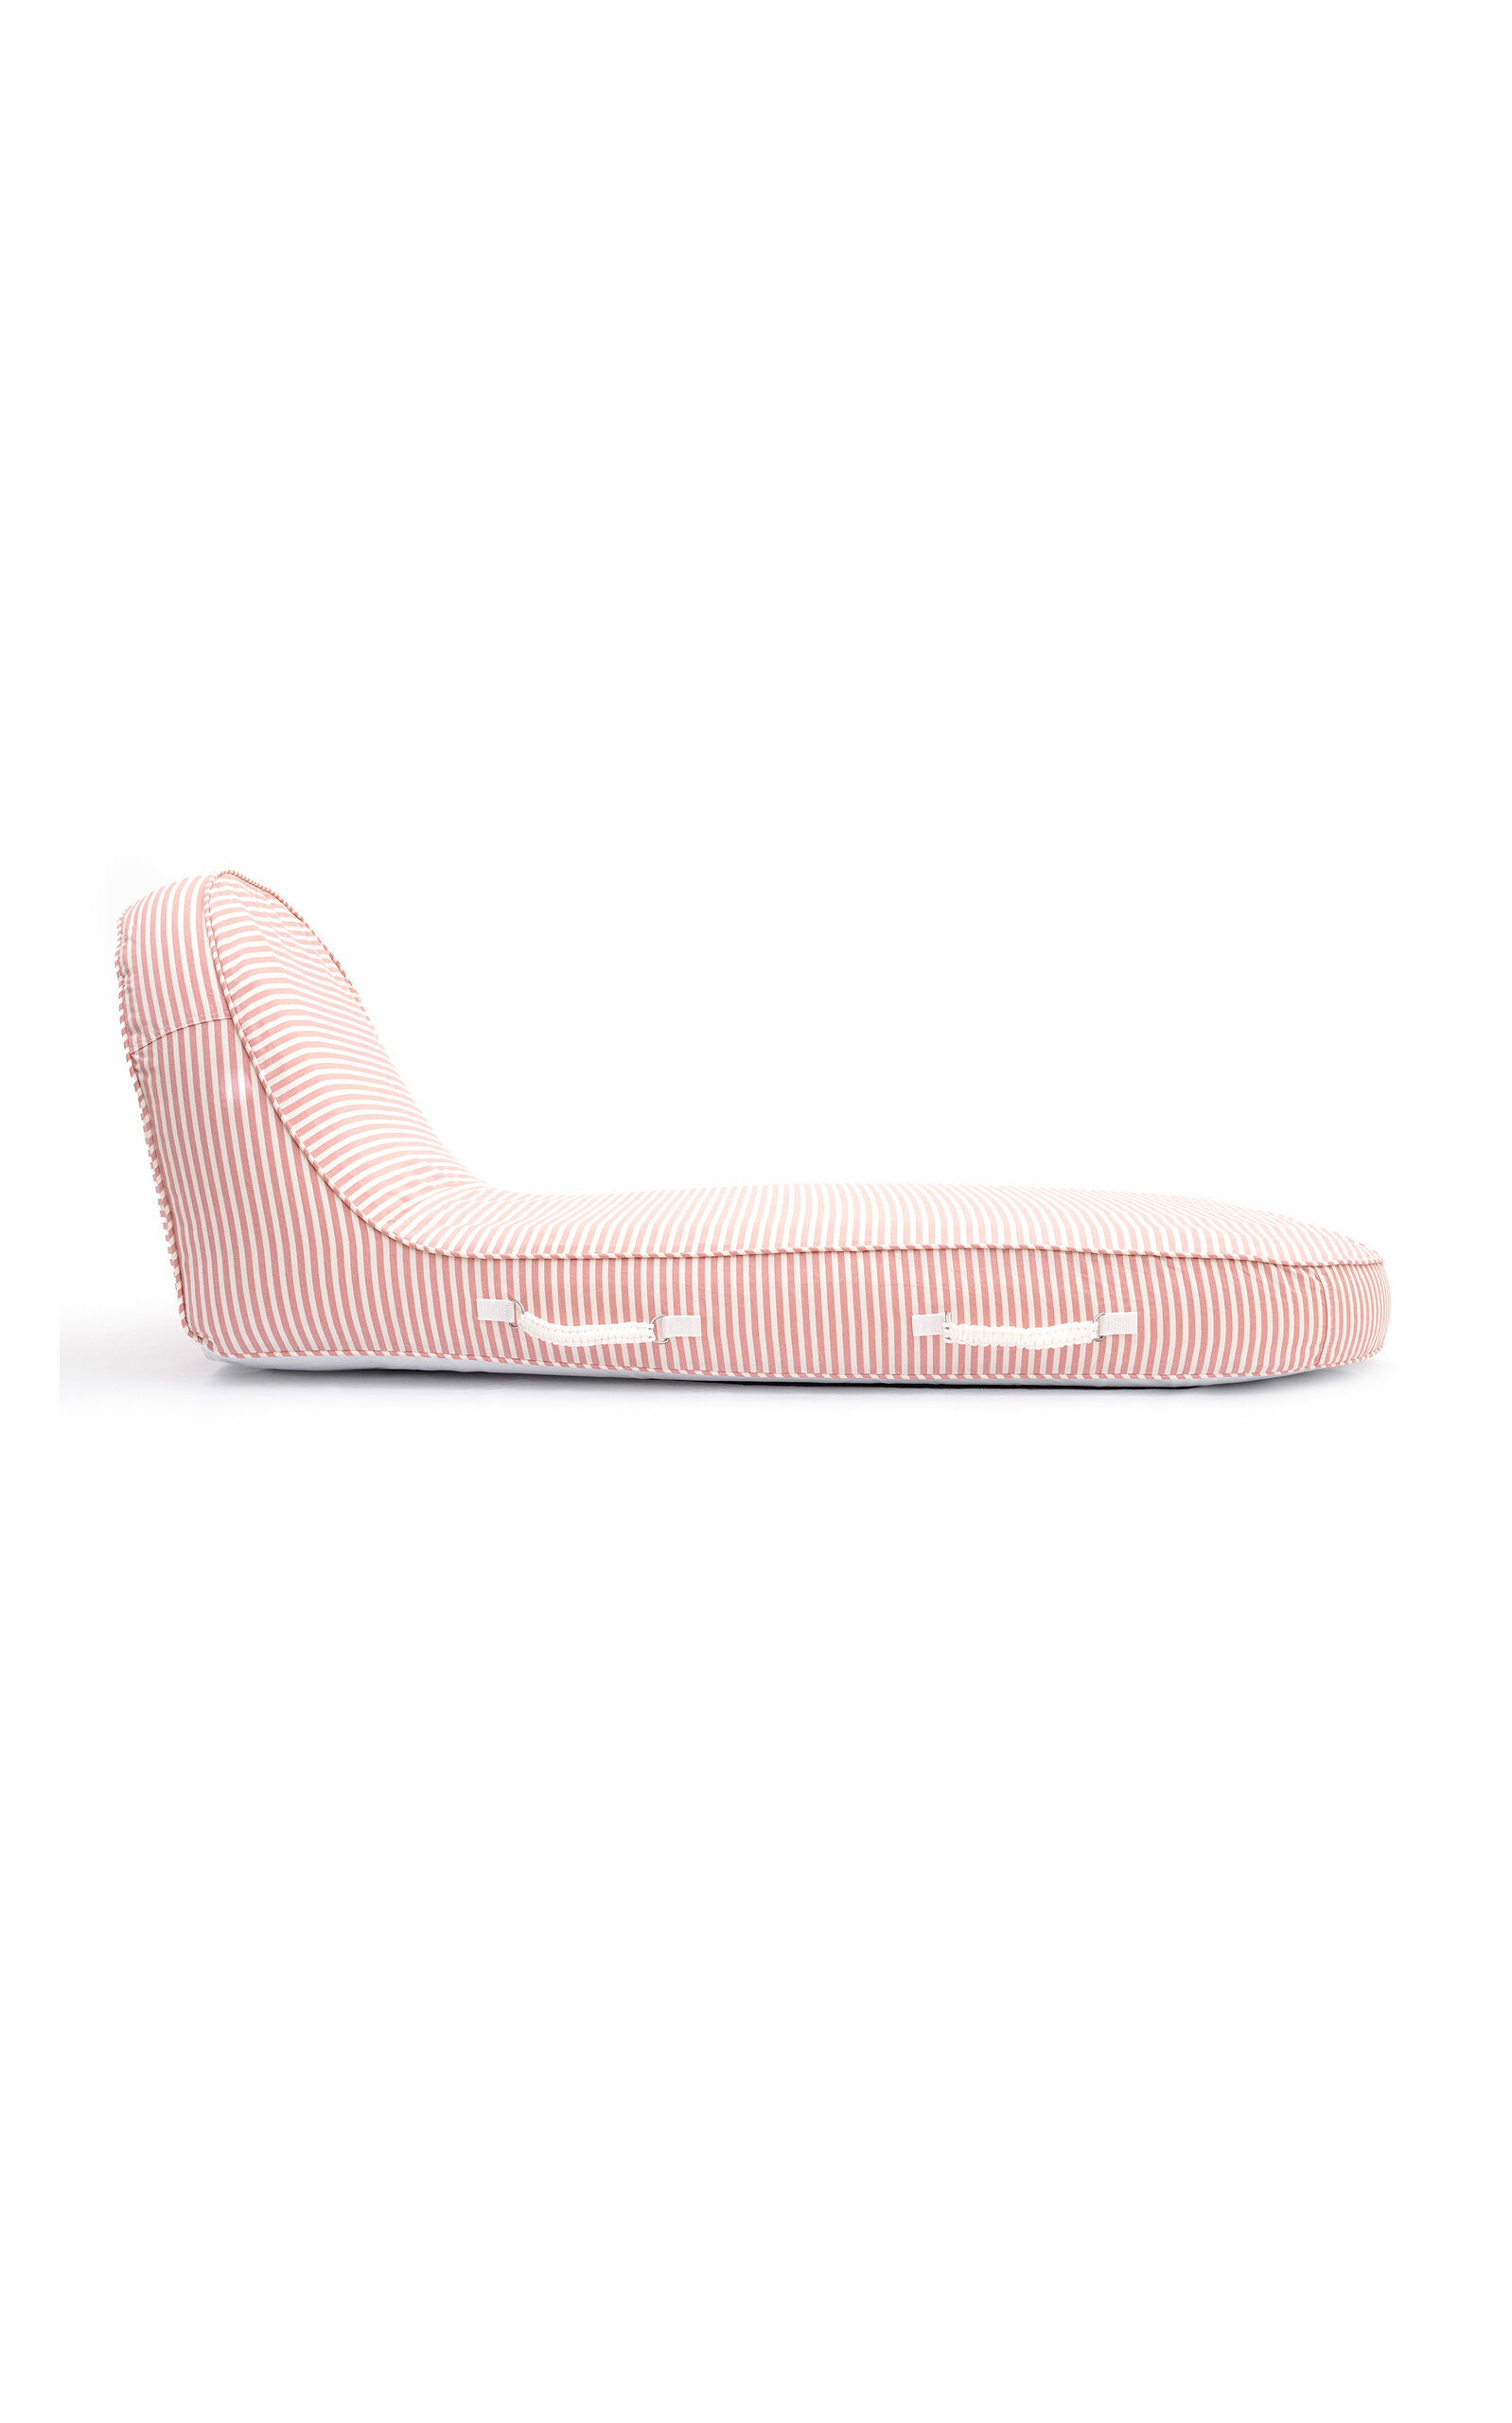 Business & Pleasure The Pool Lounger In Pink